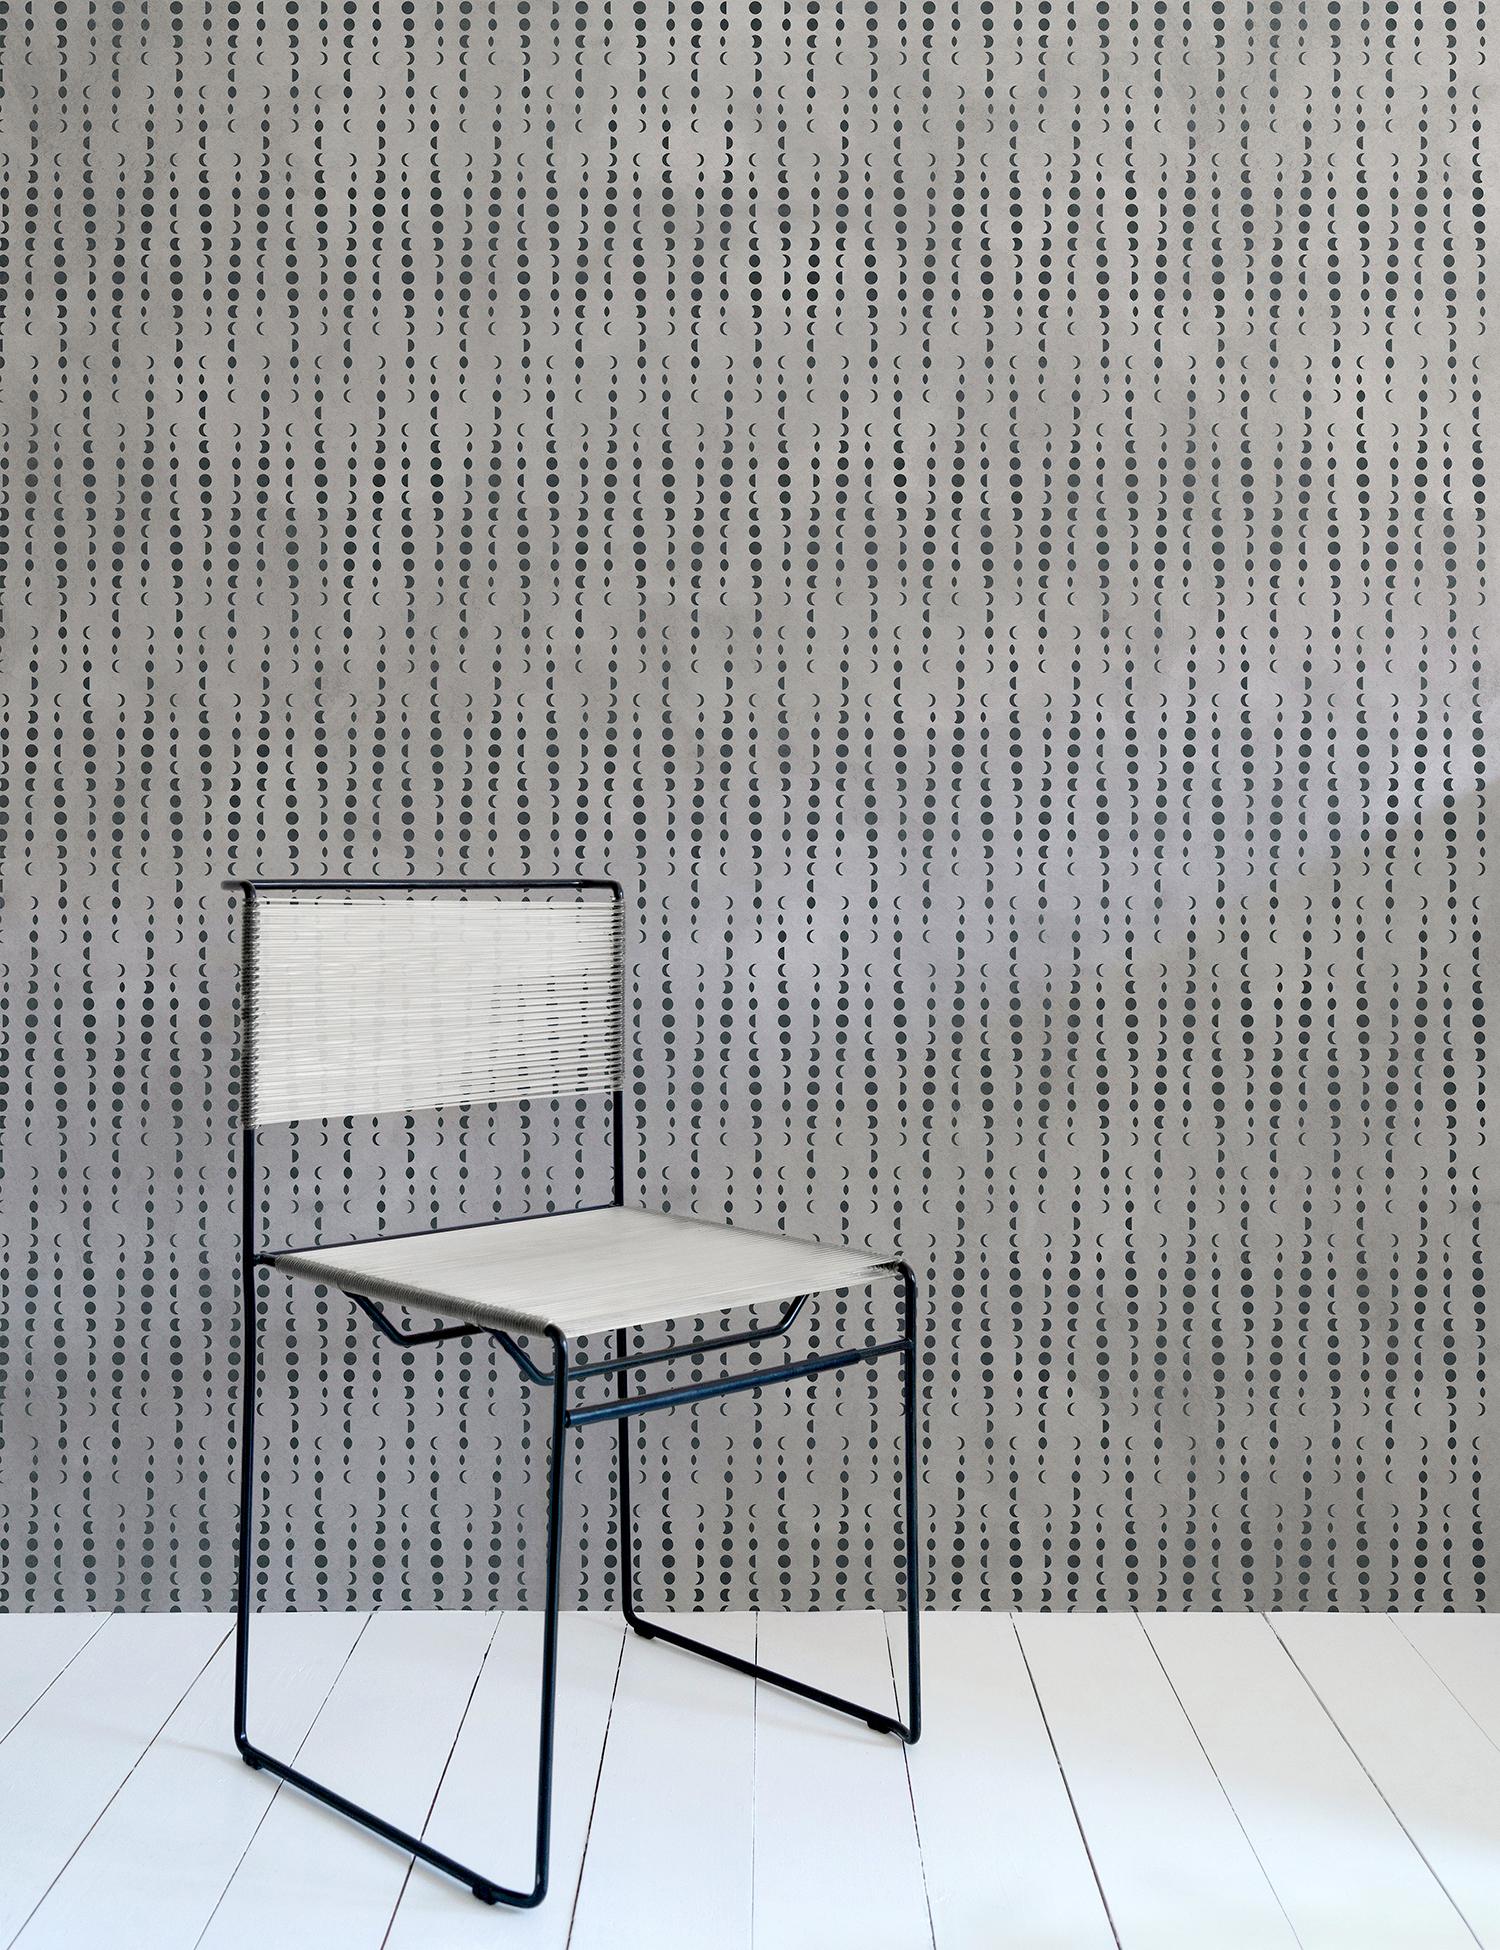 Bohemian Earthlight Designer Wallpaper in Oberon 'Charcoal and Warm Gray' For Sale